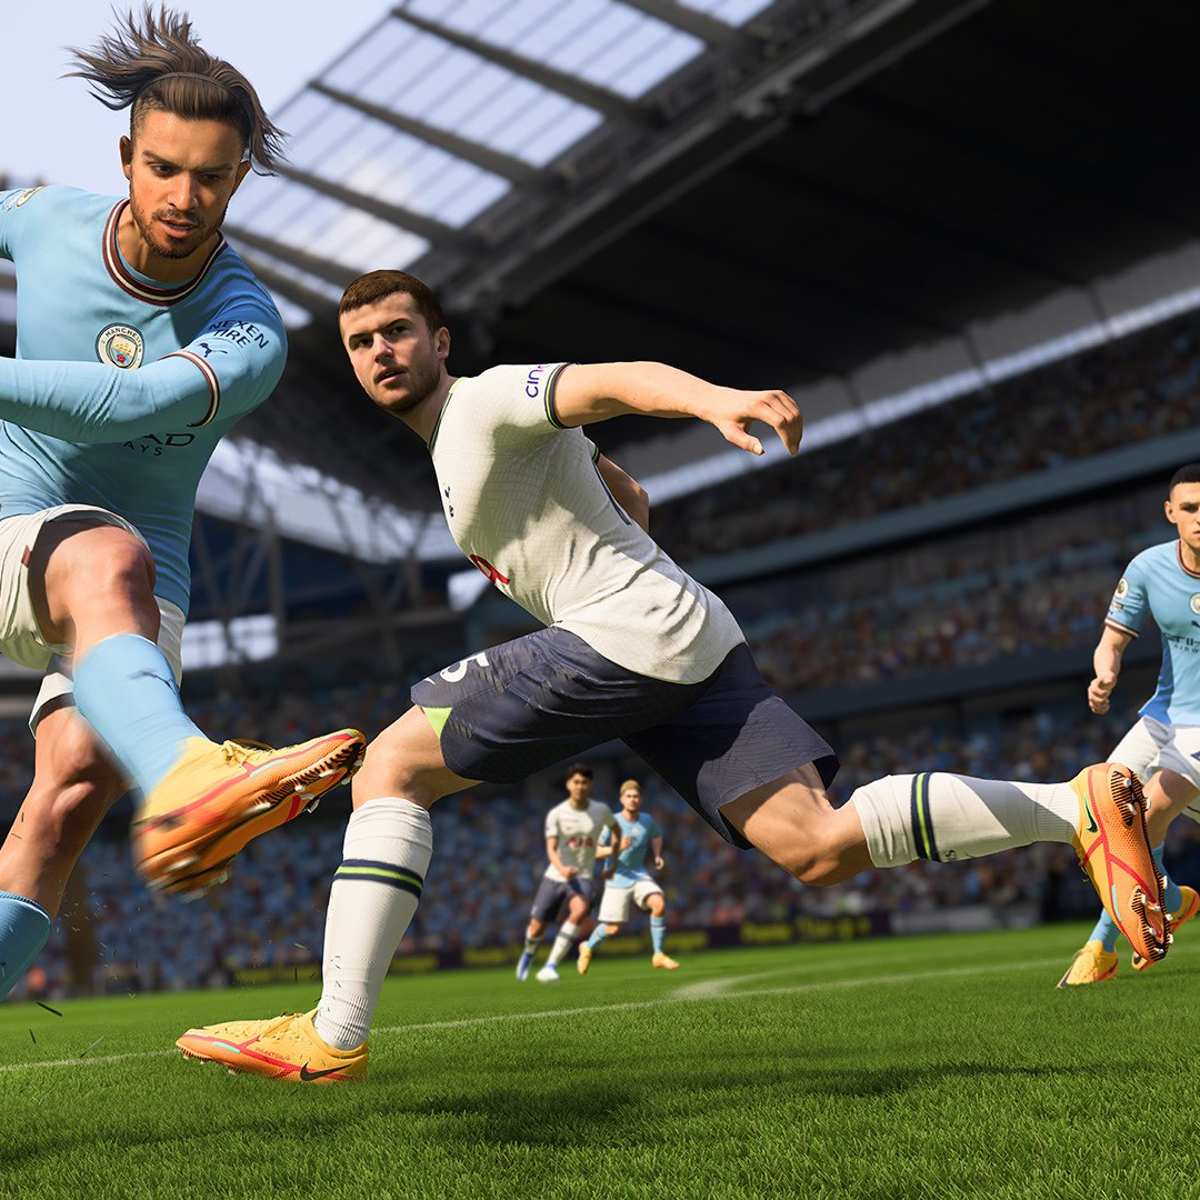 FIFA 23 career mode wonderkids: The best young players with